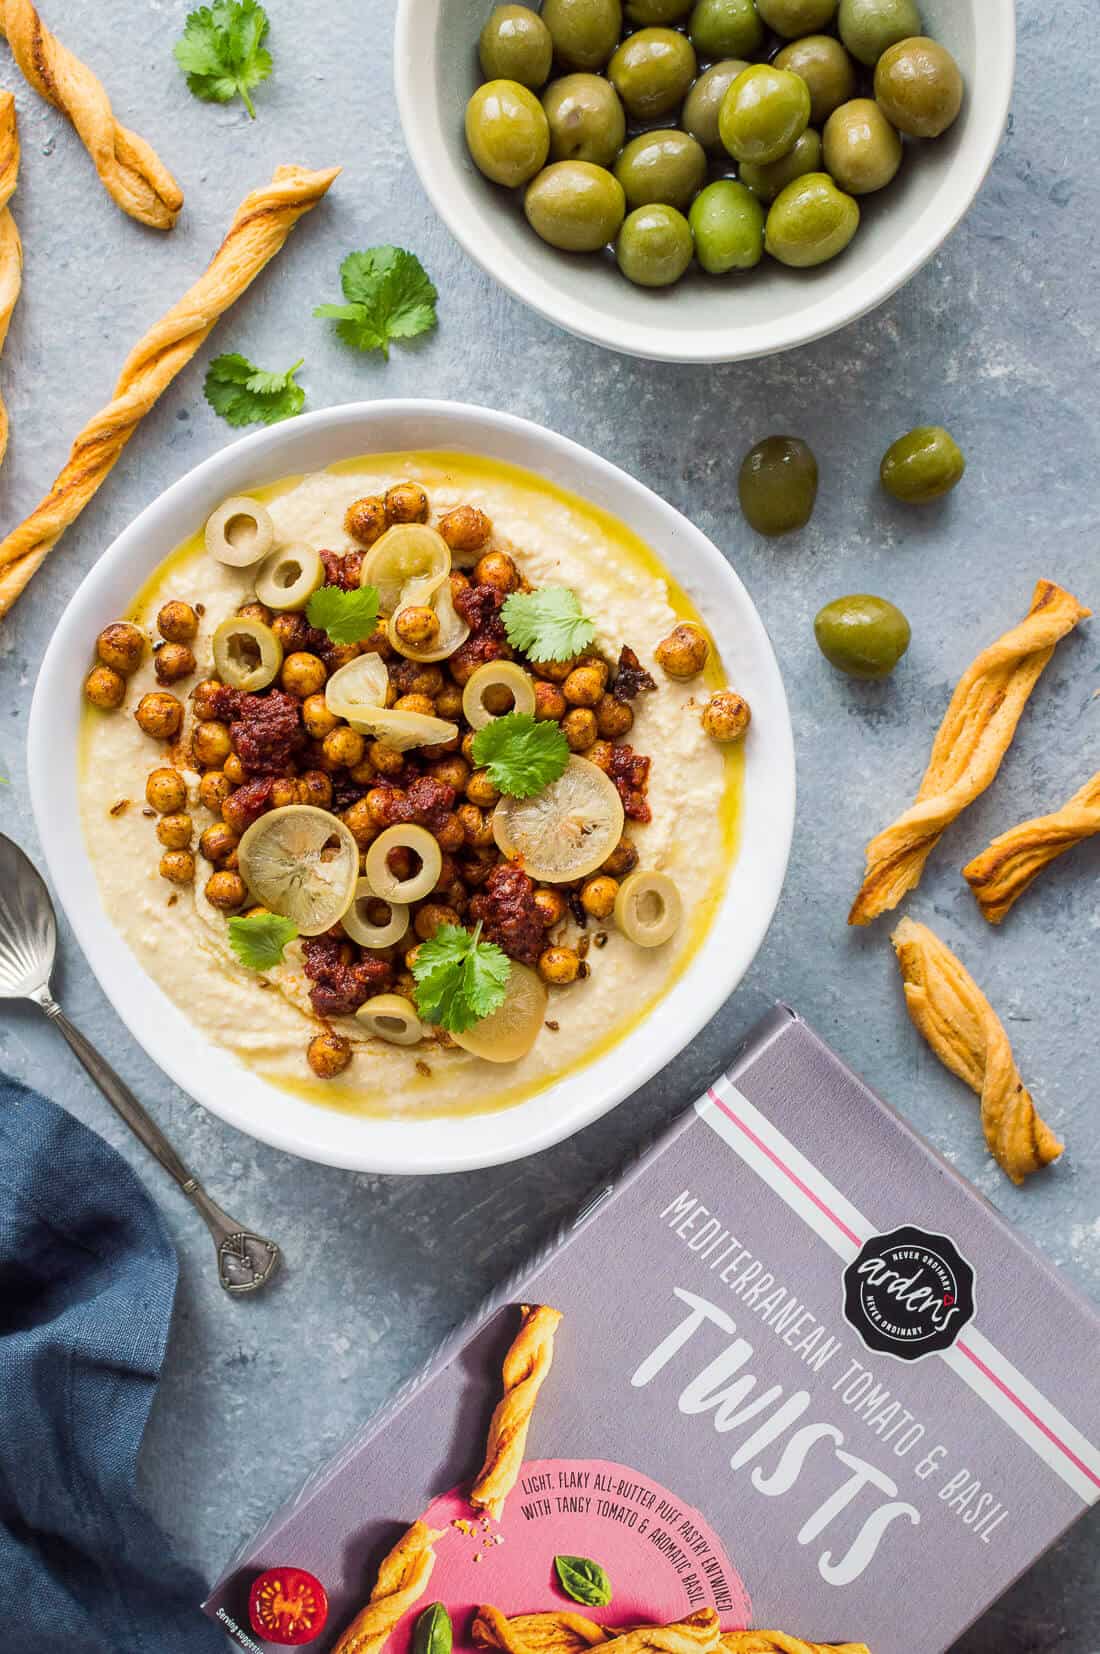 Spicy loaded hummus with crispy chickpeas, olives and Arden's mediterranean tomato and basil twists